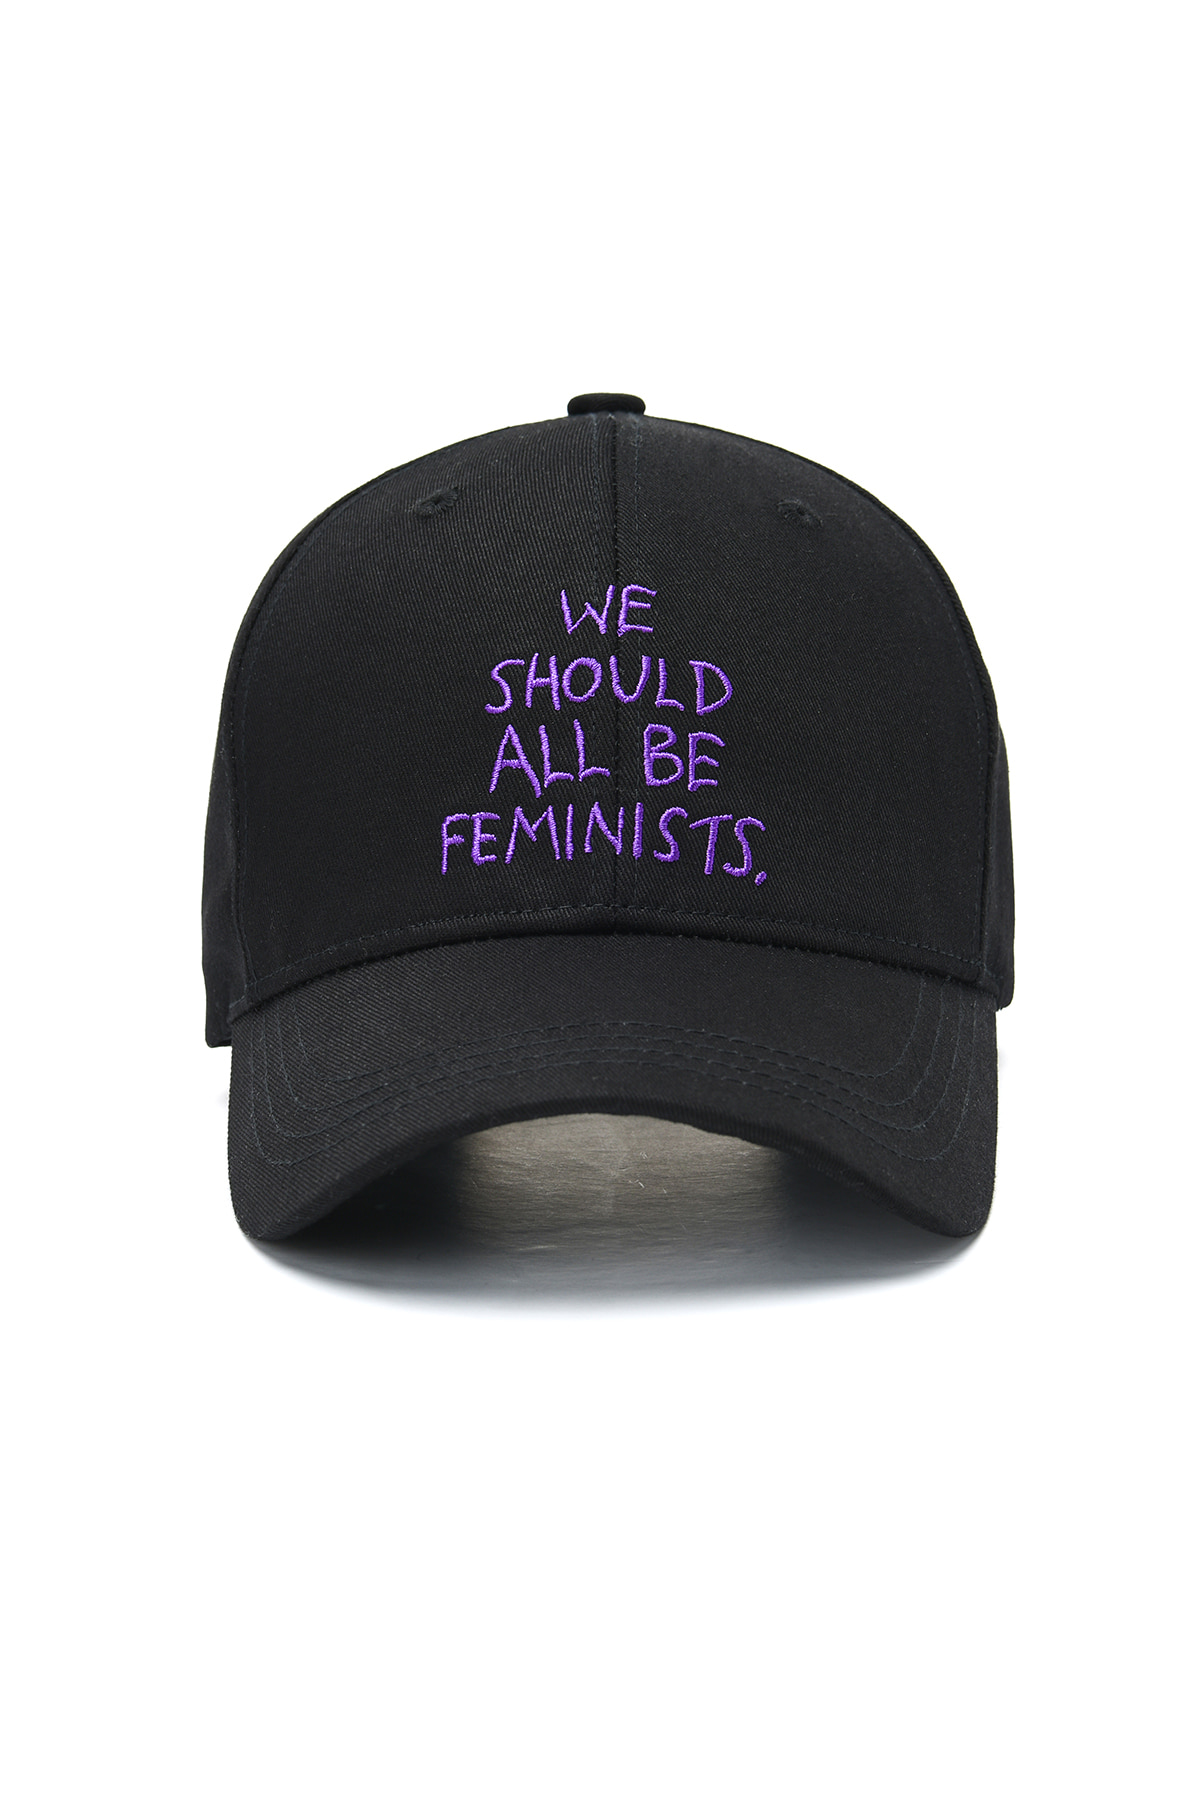 &quot;WE SHOULD ALL BE FEMINISTS&quot; EMBROIDERED BALL CAP BLACK PURPLE